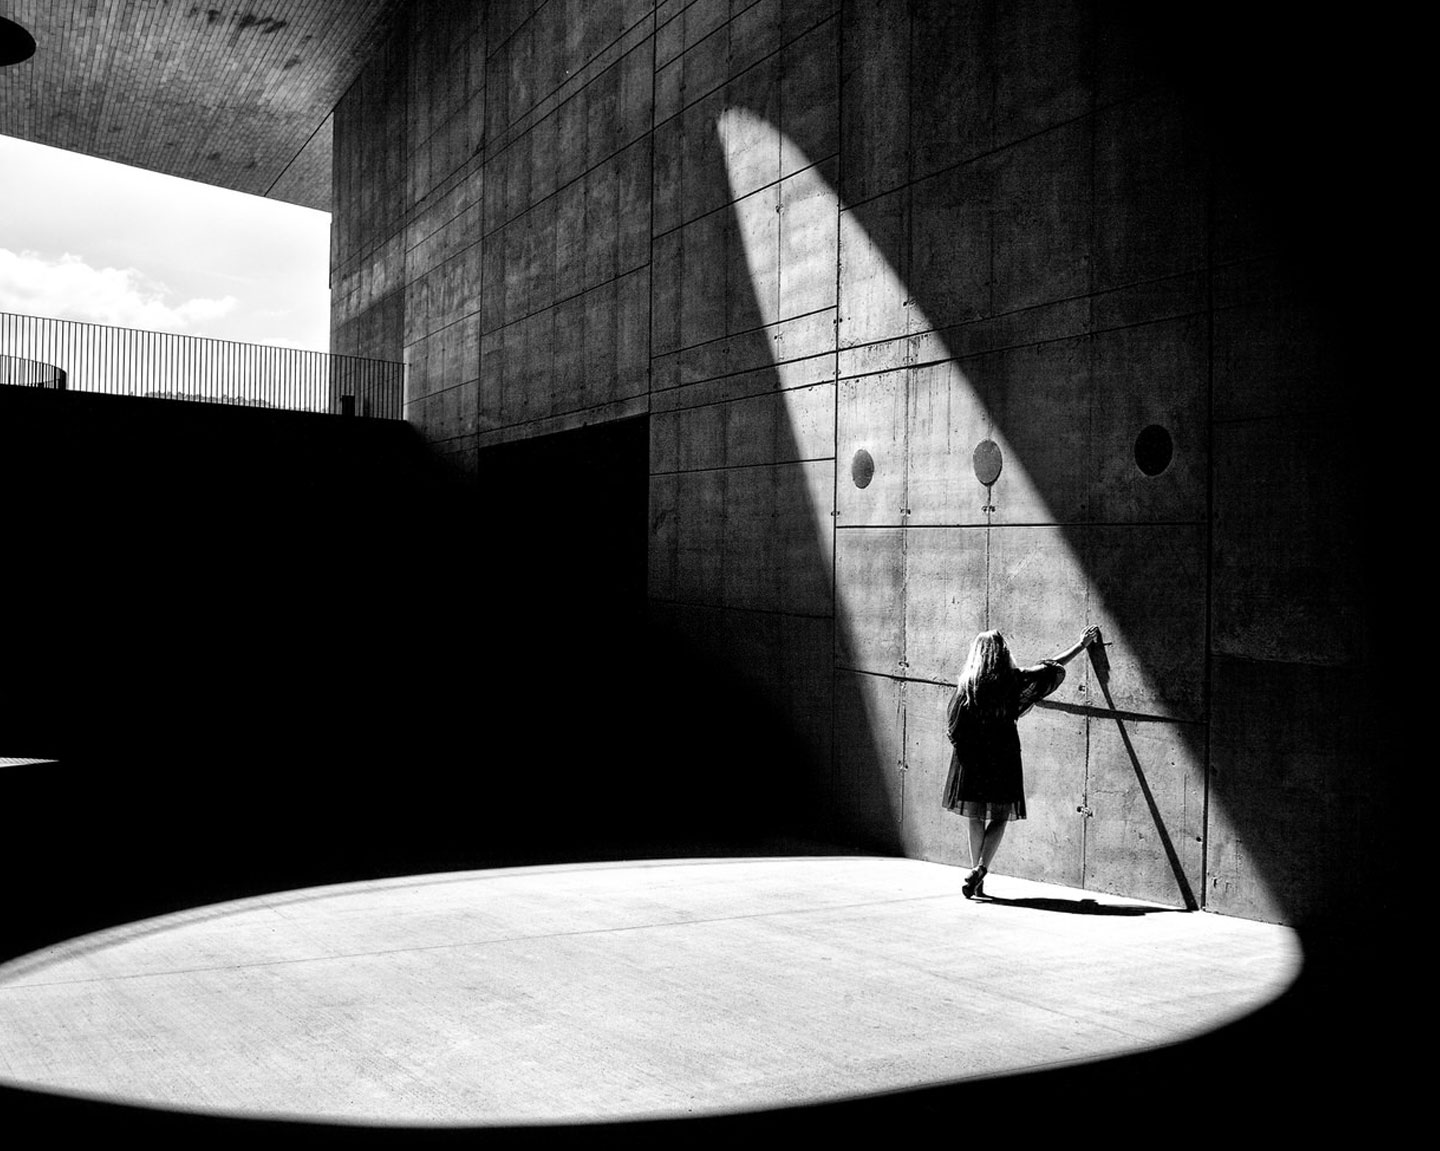 Woman standing in natural light beaming into a dark building touching a wall, taken by Allen Schaller